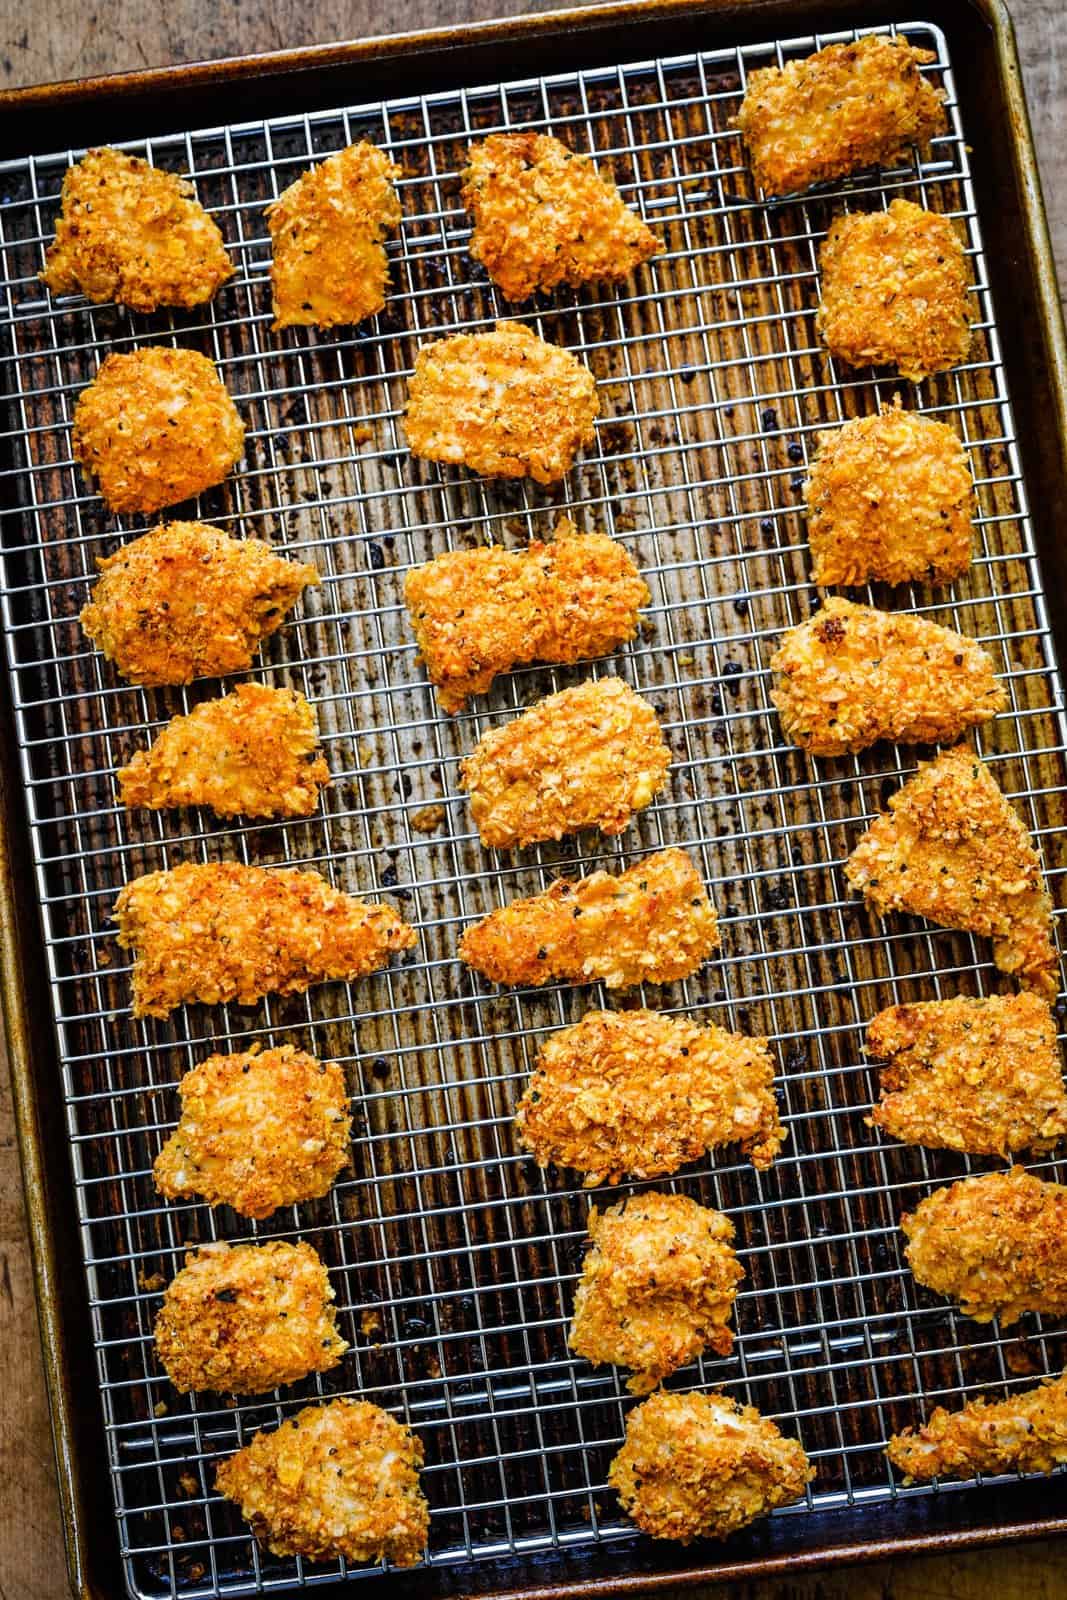 Finished chicken nuggets on wire rack over baking pan.